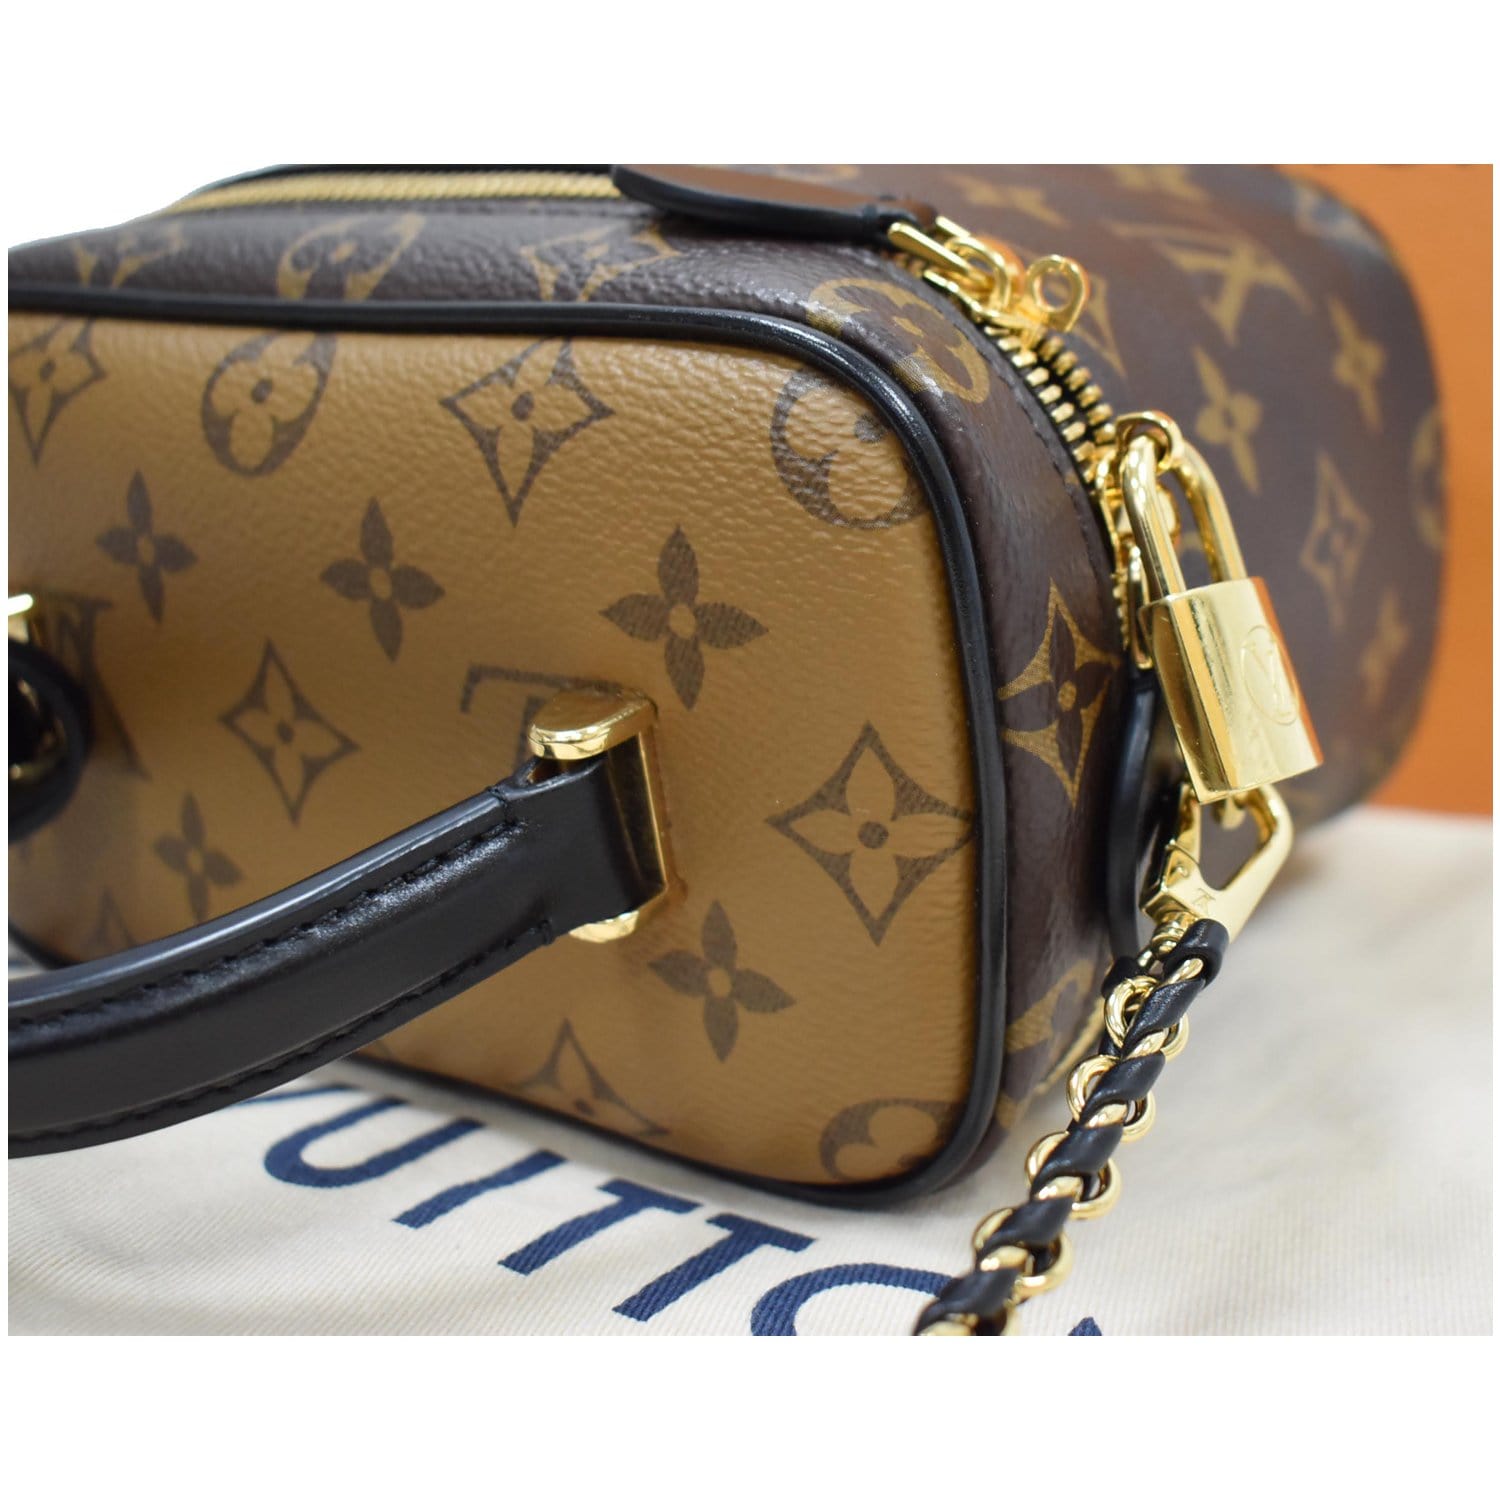 Vanity leather crossbody bag Louis Vuitton Brown in Leather - 35651802